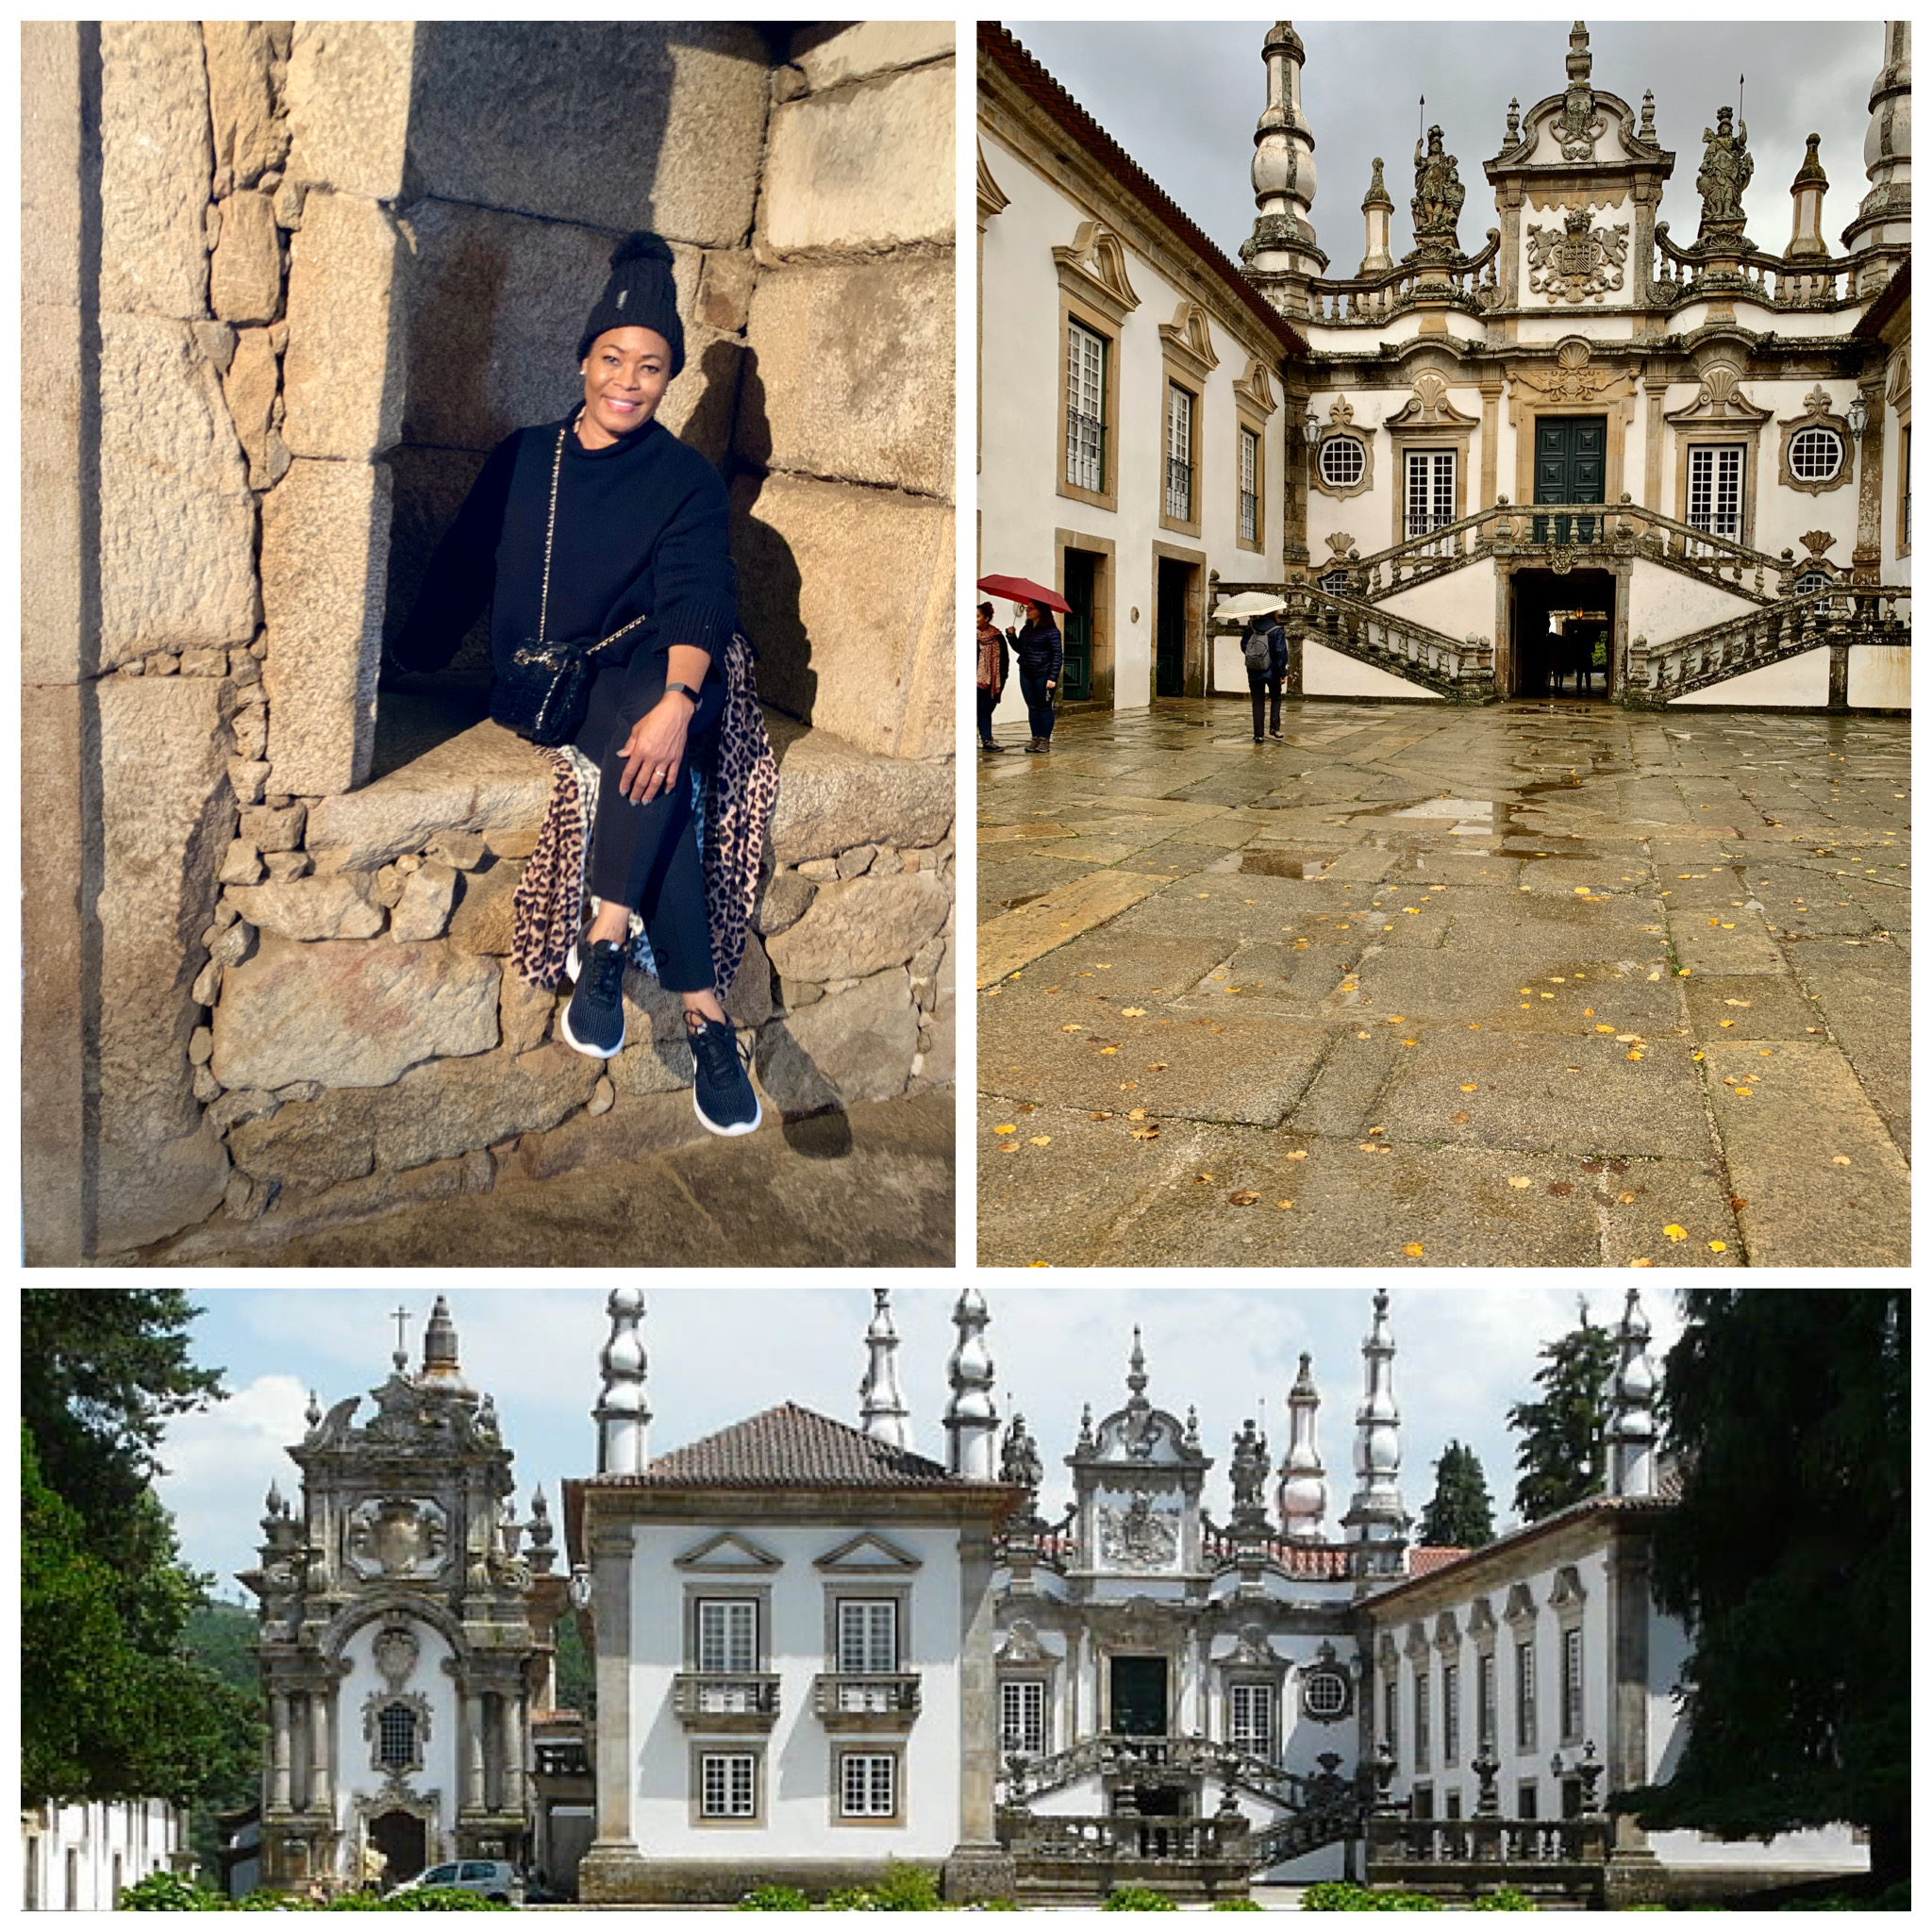 A visit to The Palace of Mateus, included in our European Vacation on the Douro River